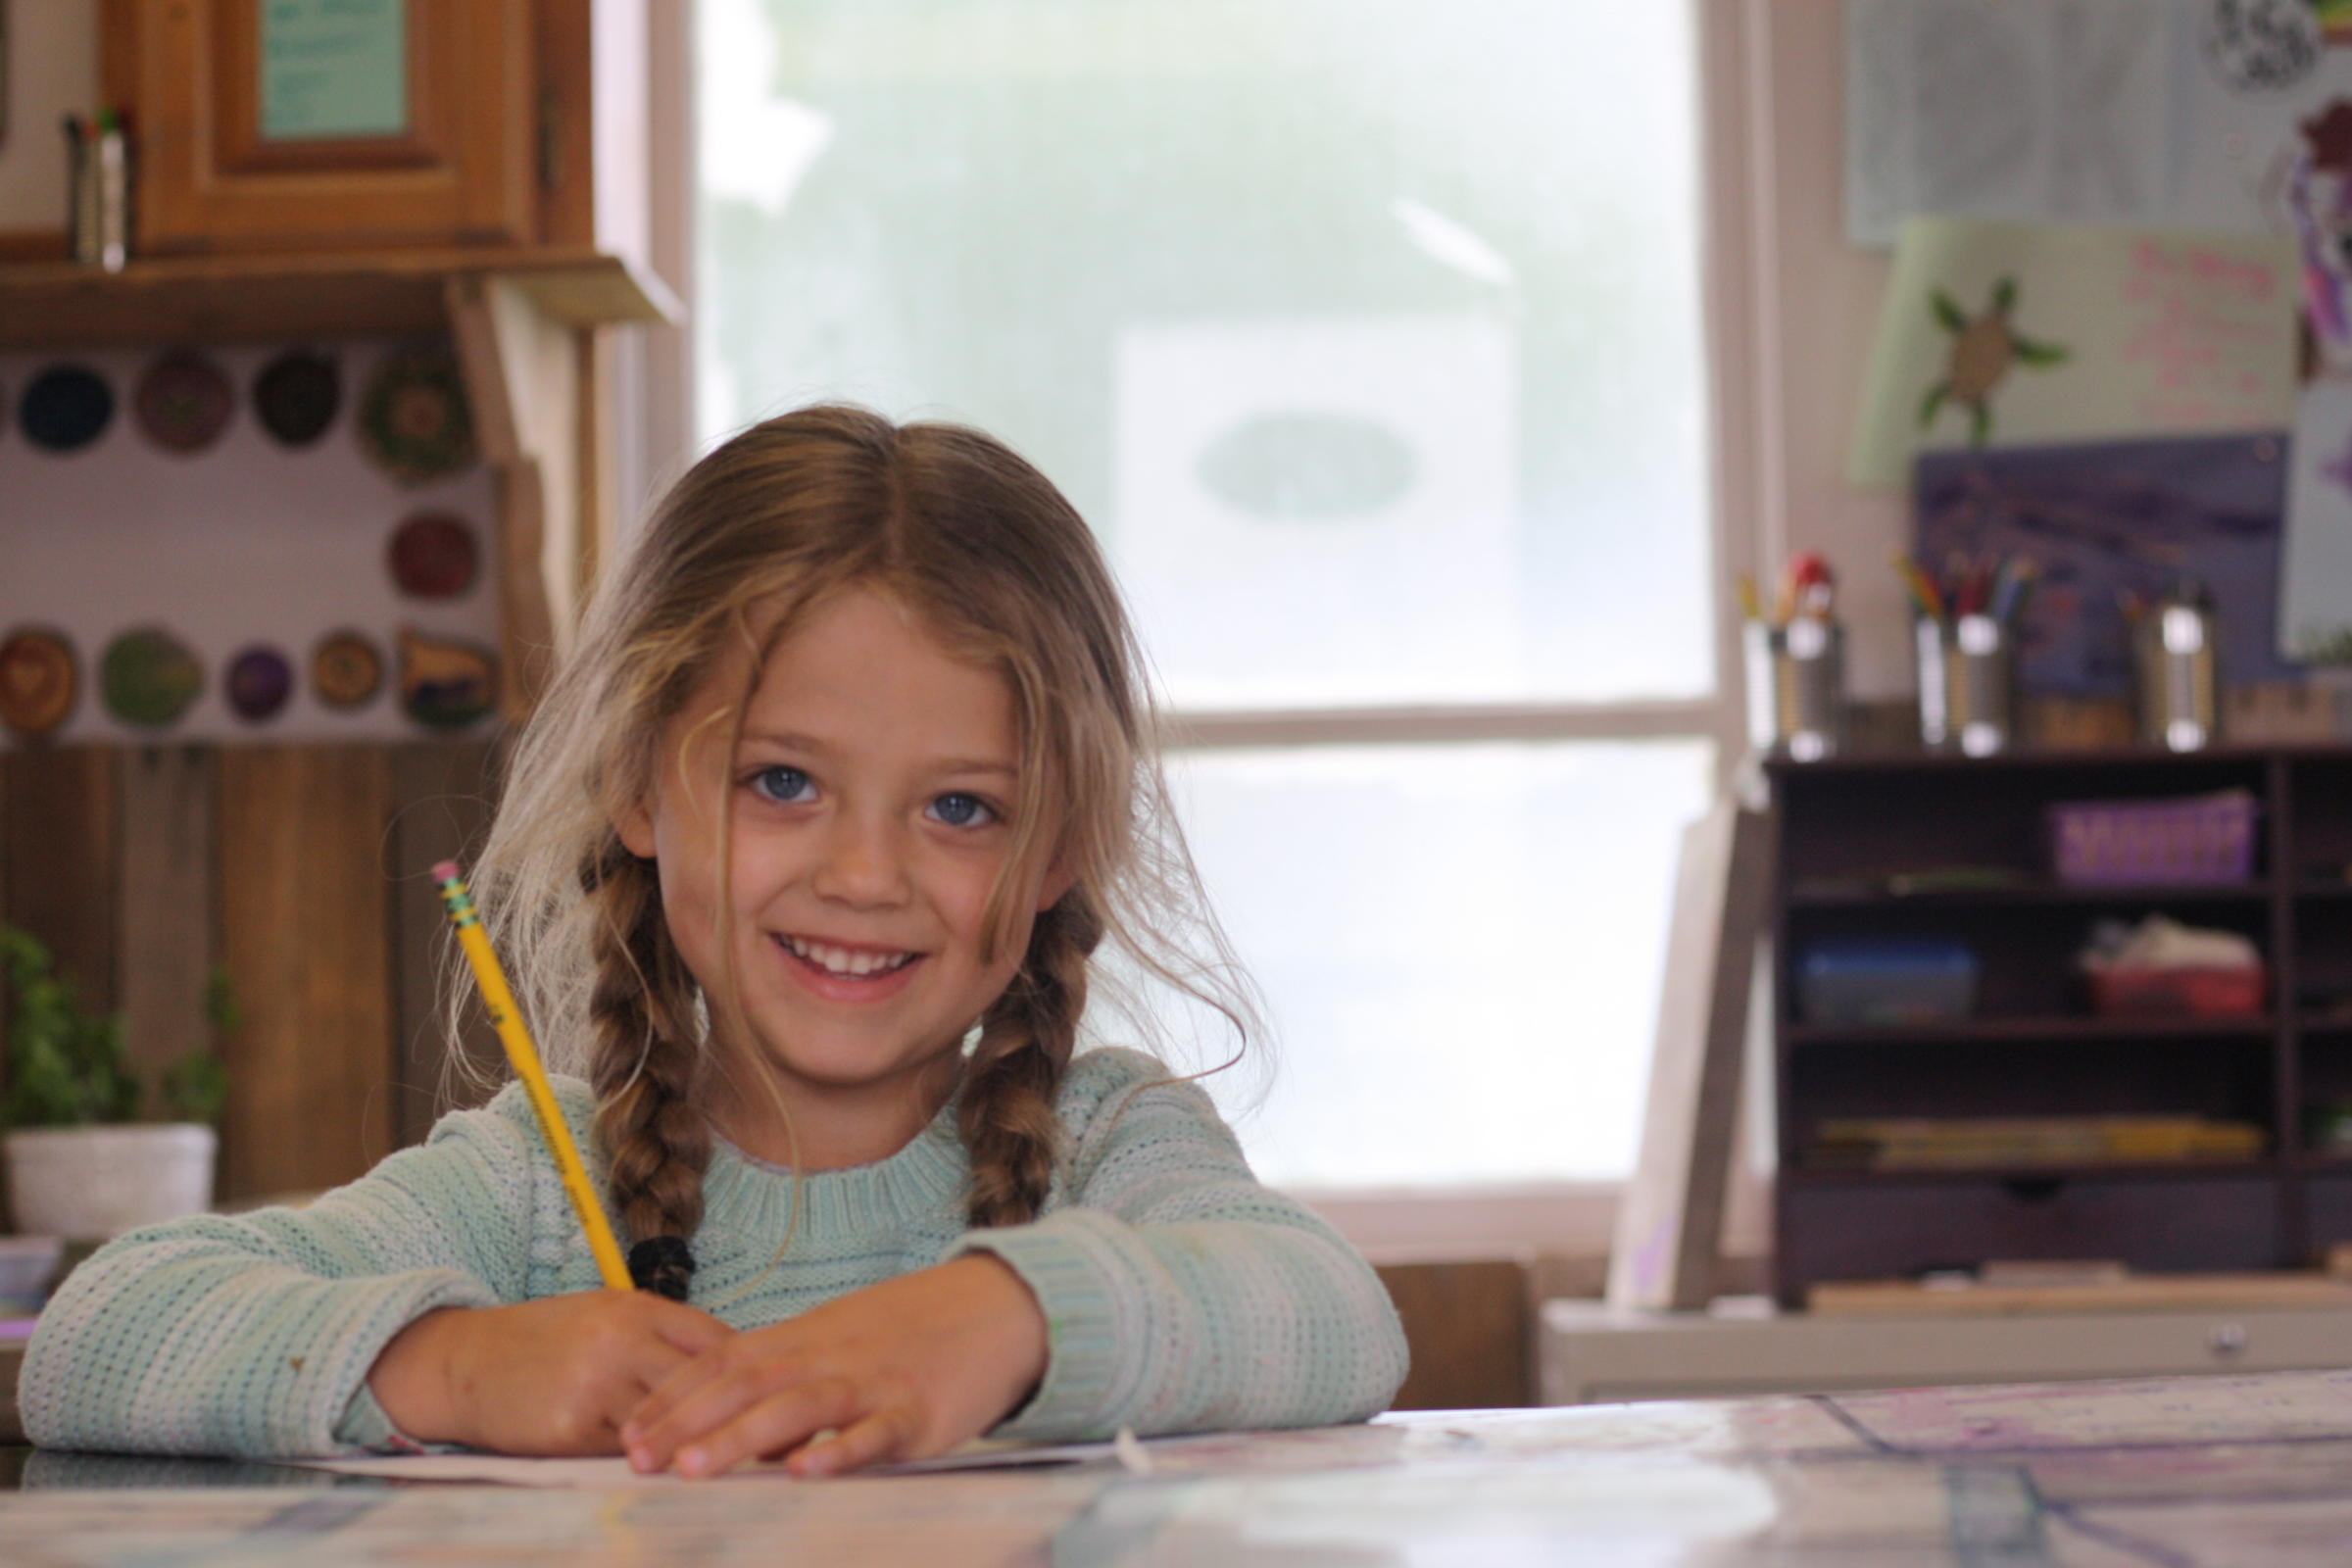 Mischaell Romo, 4, lives in the same building as the Dillingham Christian Youth Center. She’s familiar with many of the youth who spend time there, and she’s always looking for someone to draw, paint, or color with. (Photo by Zoey Laird/KDLG)